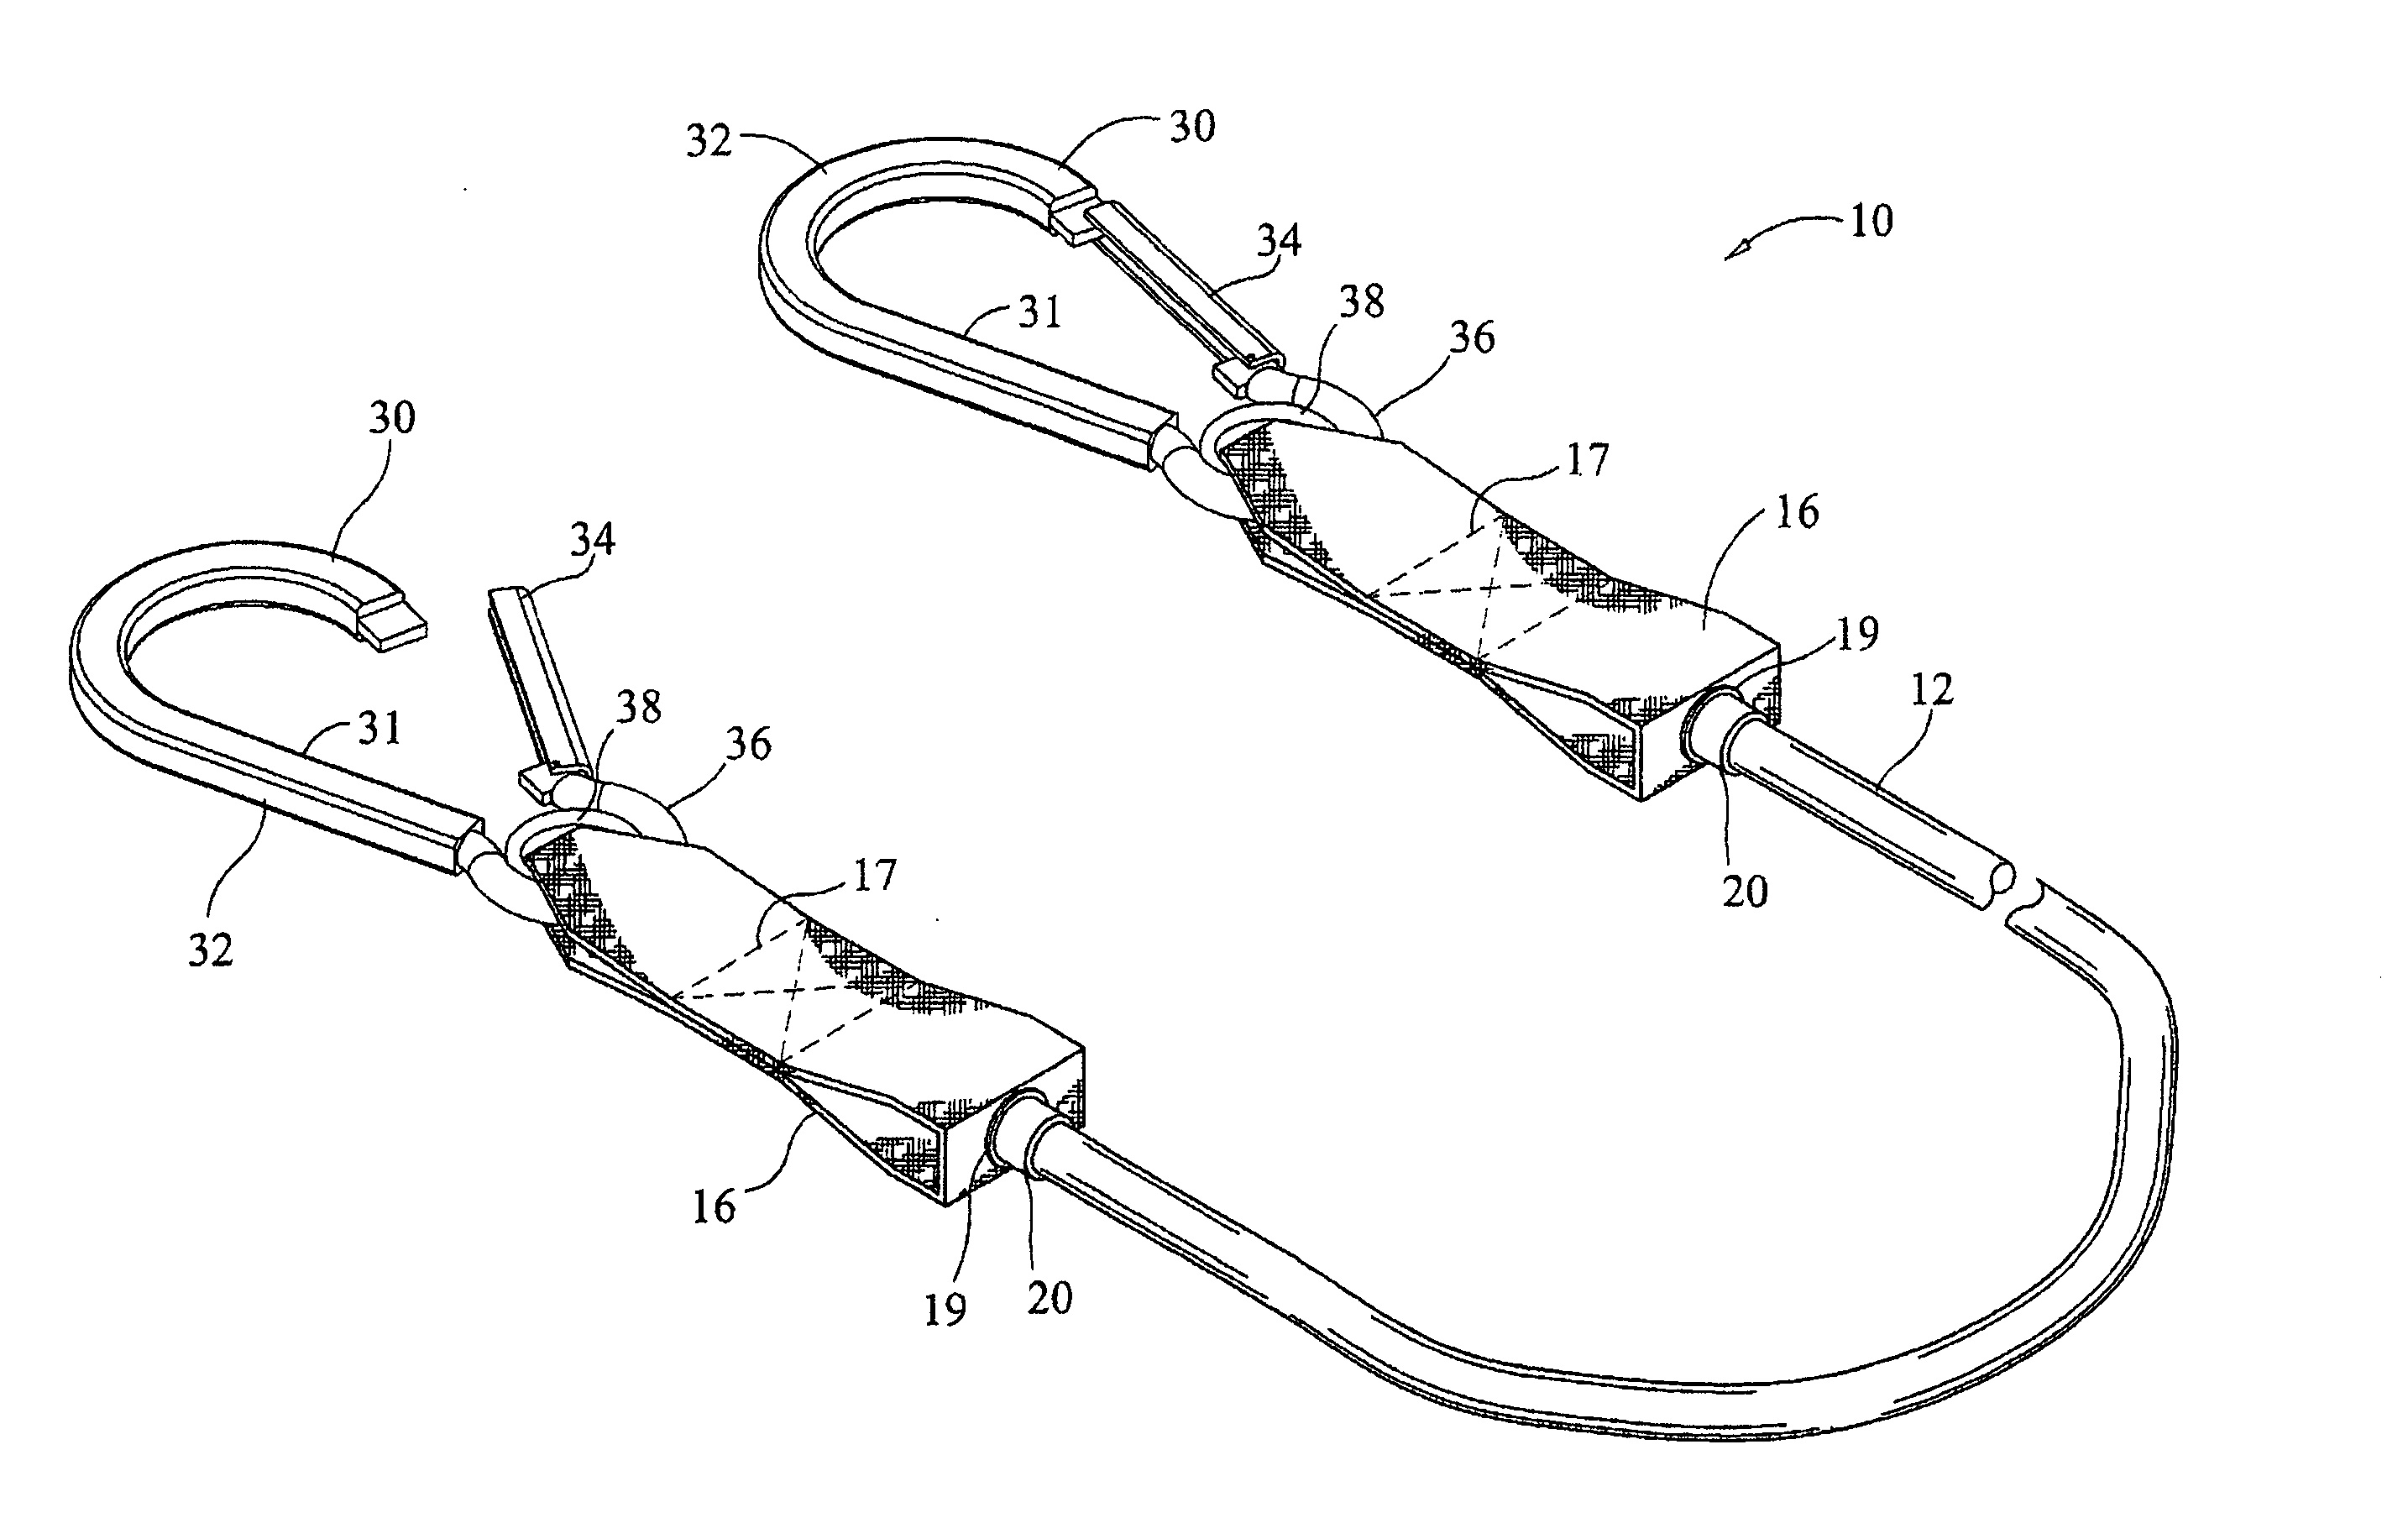 Resistance training exercise and fitness apparatus with attachment device